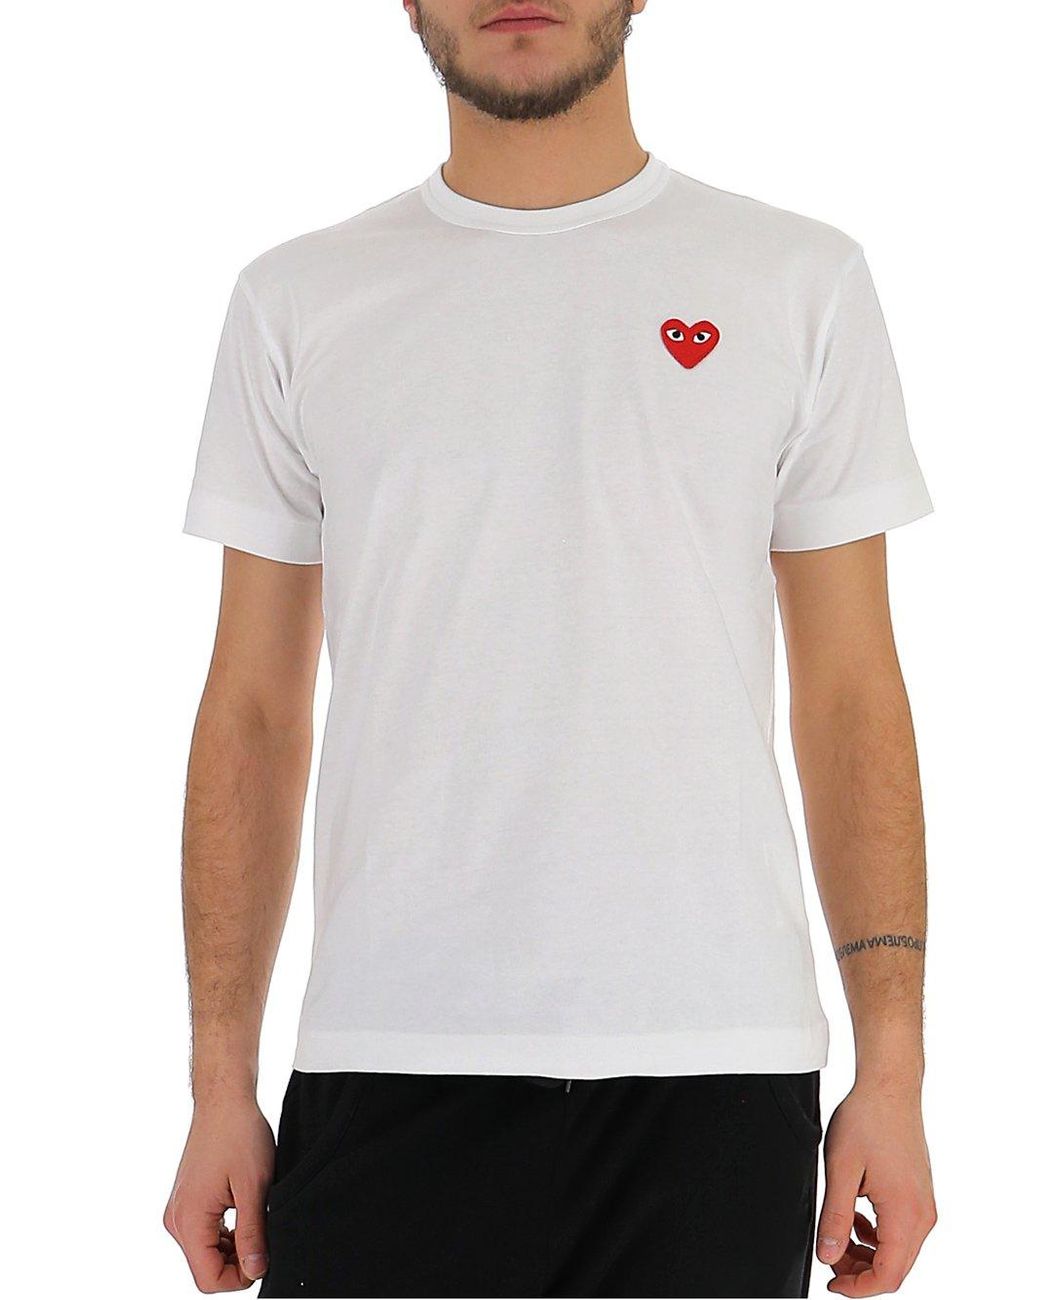 COMME des GARCONS SHIRT Tシャツ・カットソー M 白